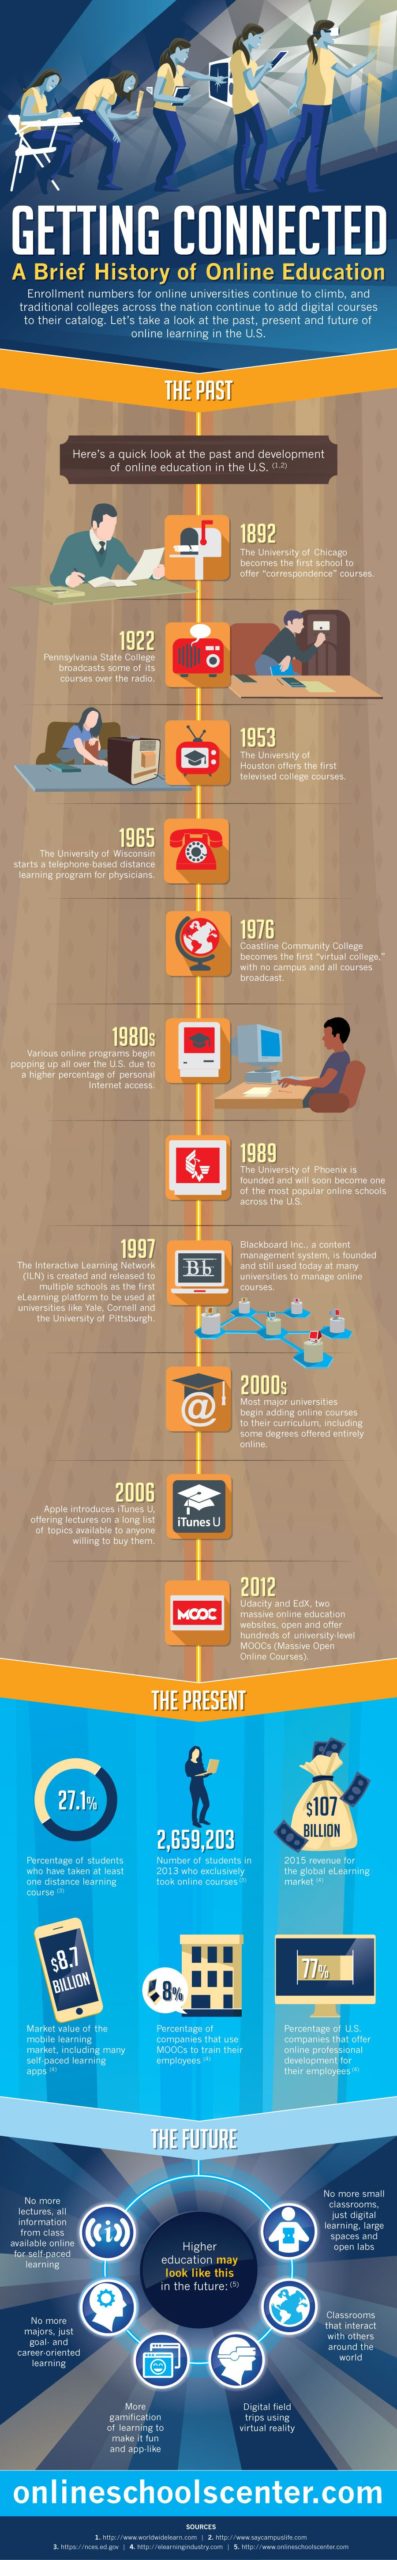 history of online education